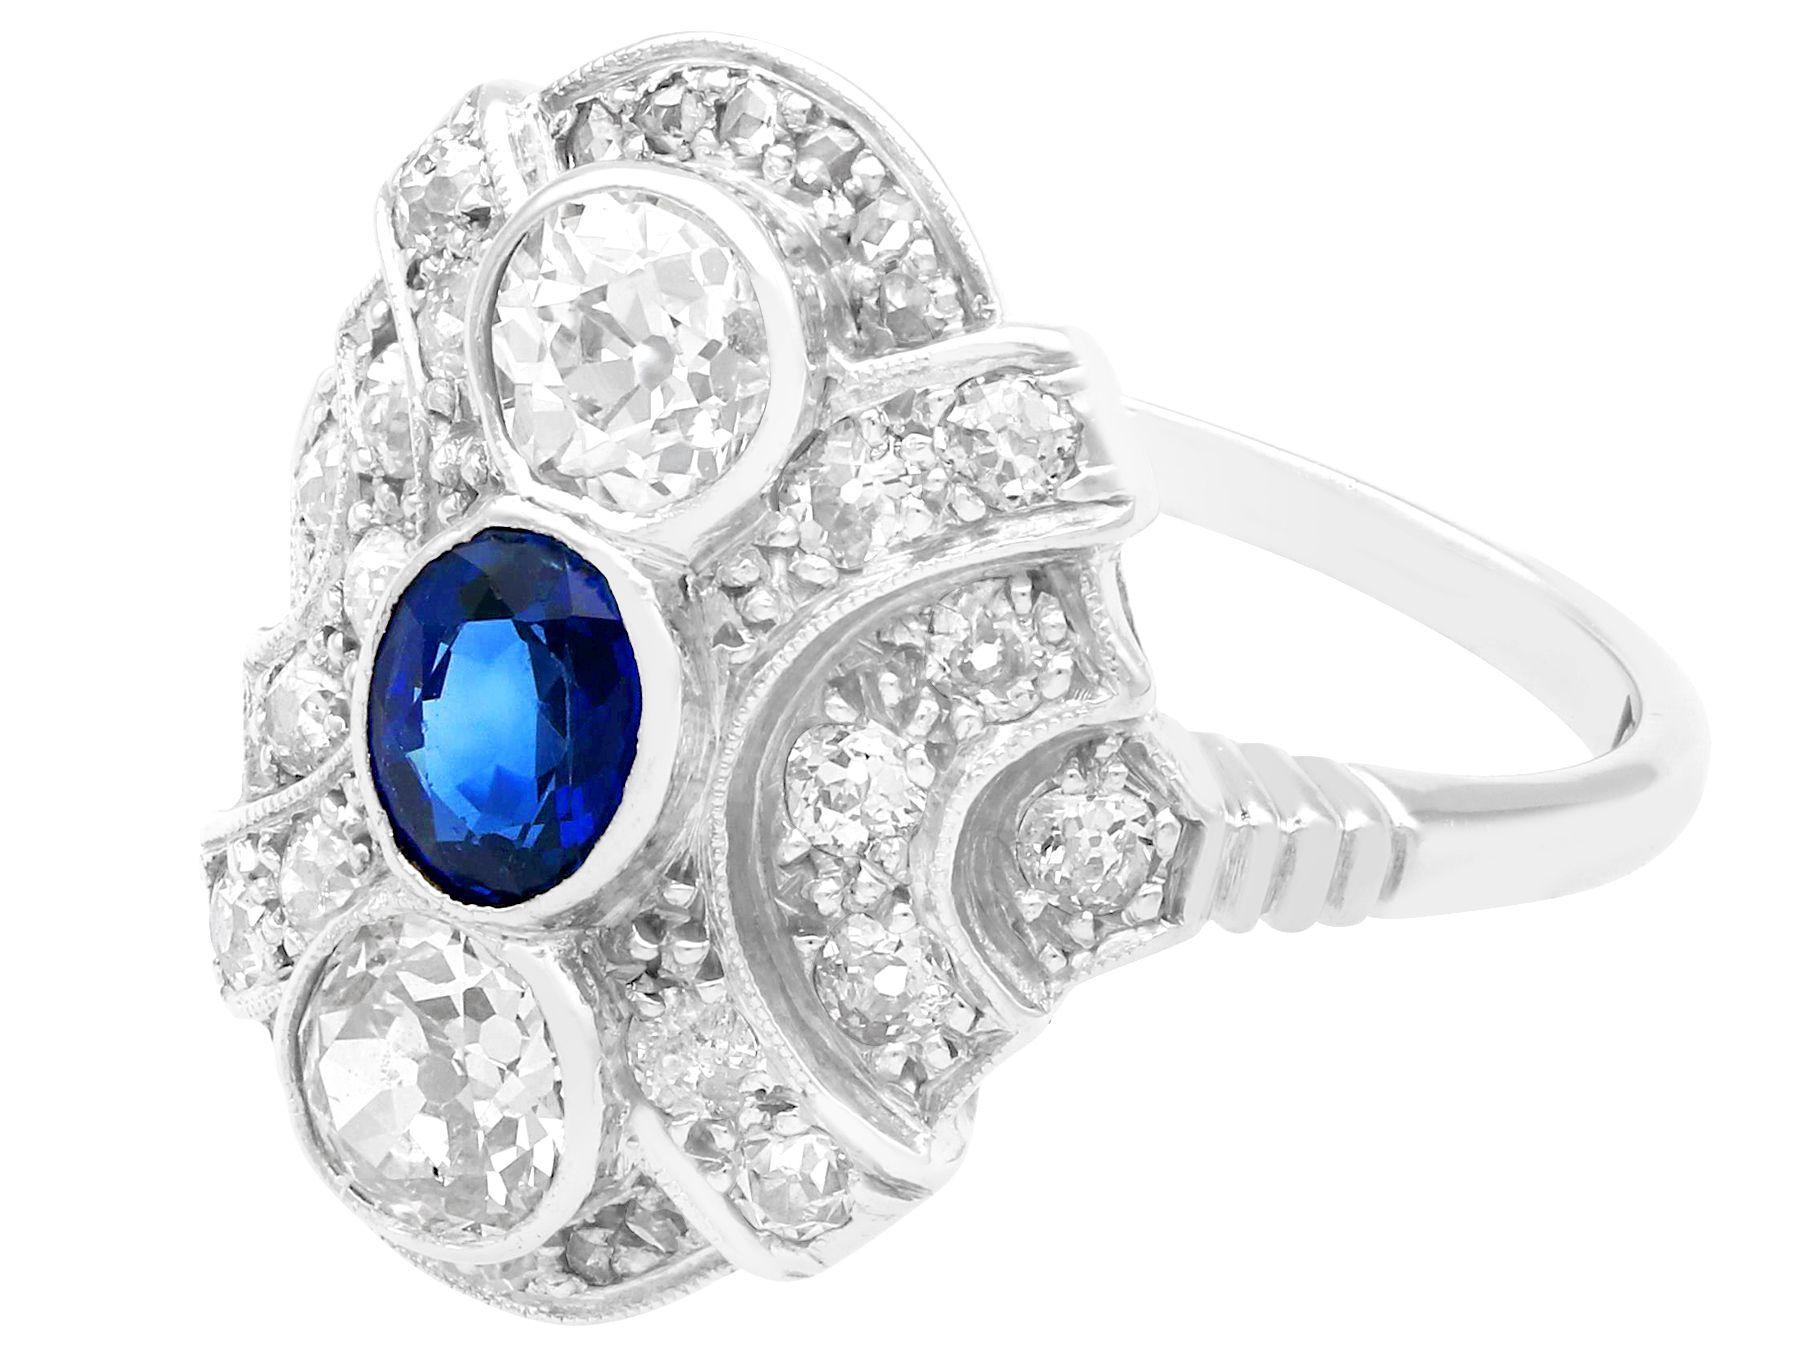 Oval Cut Antique Sapphire and 1.64 Carat Diamond White Gold Cocktail Ring, circa 1935 For Sale